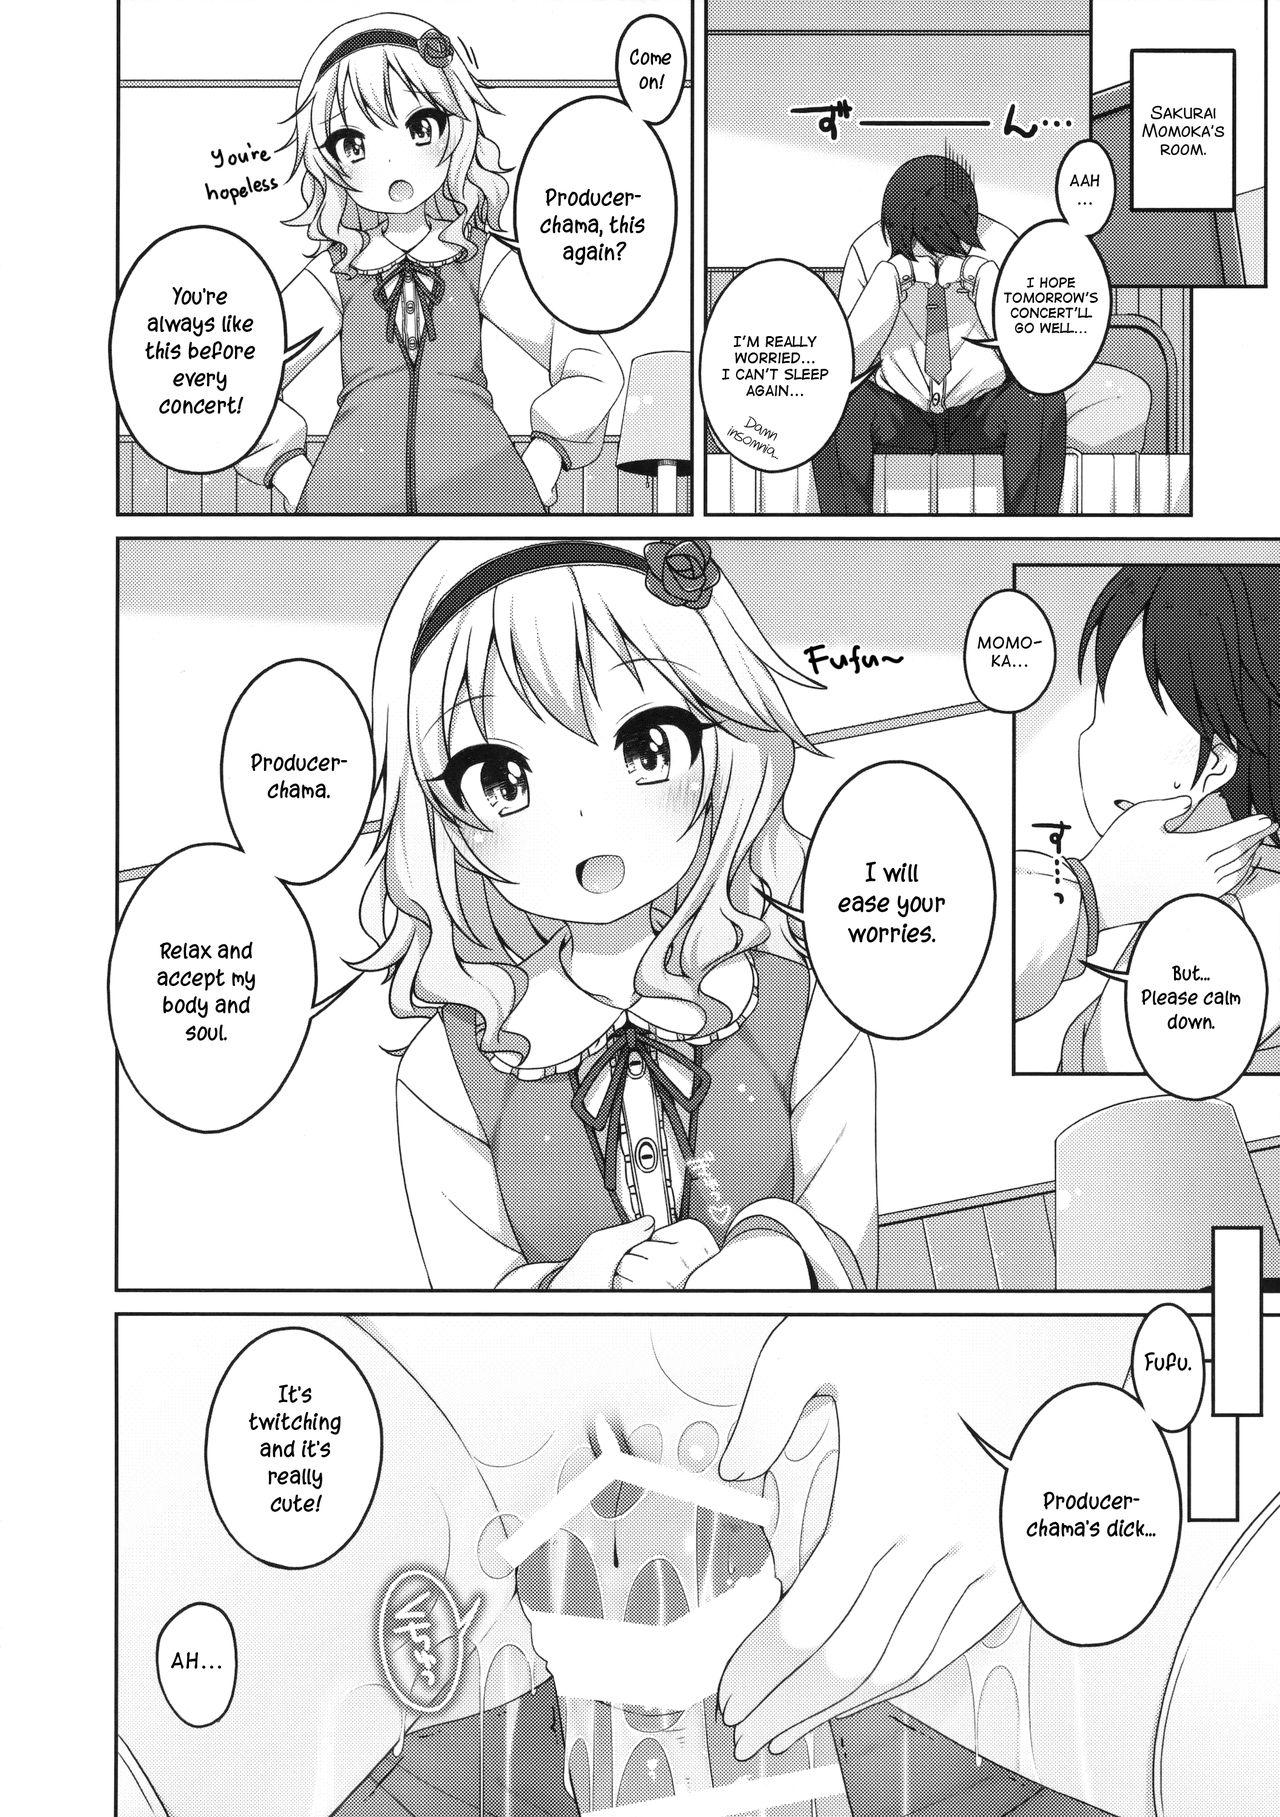 Gay Physicalexamination Live no Mae no Hi wa | The day before the concert - The idolmaster Movies - Page 7